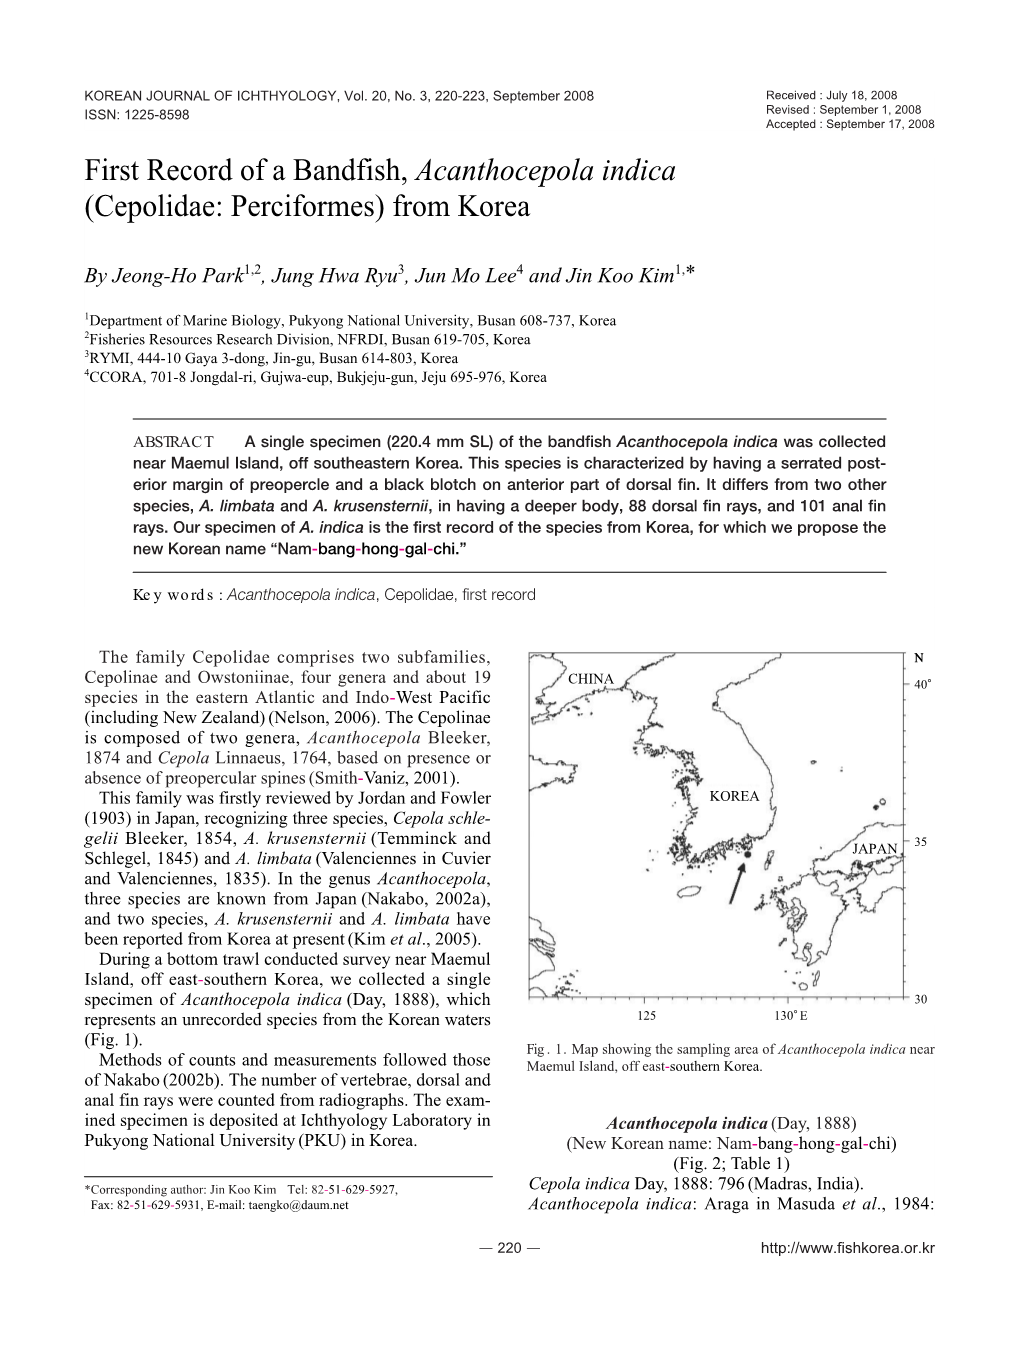 First Record of a Bandfish, Acanthocepola Indica (Cepolidae: Perciformes) from Korea